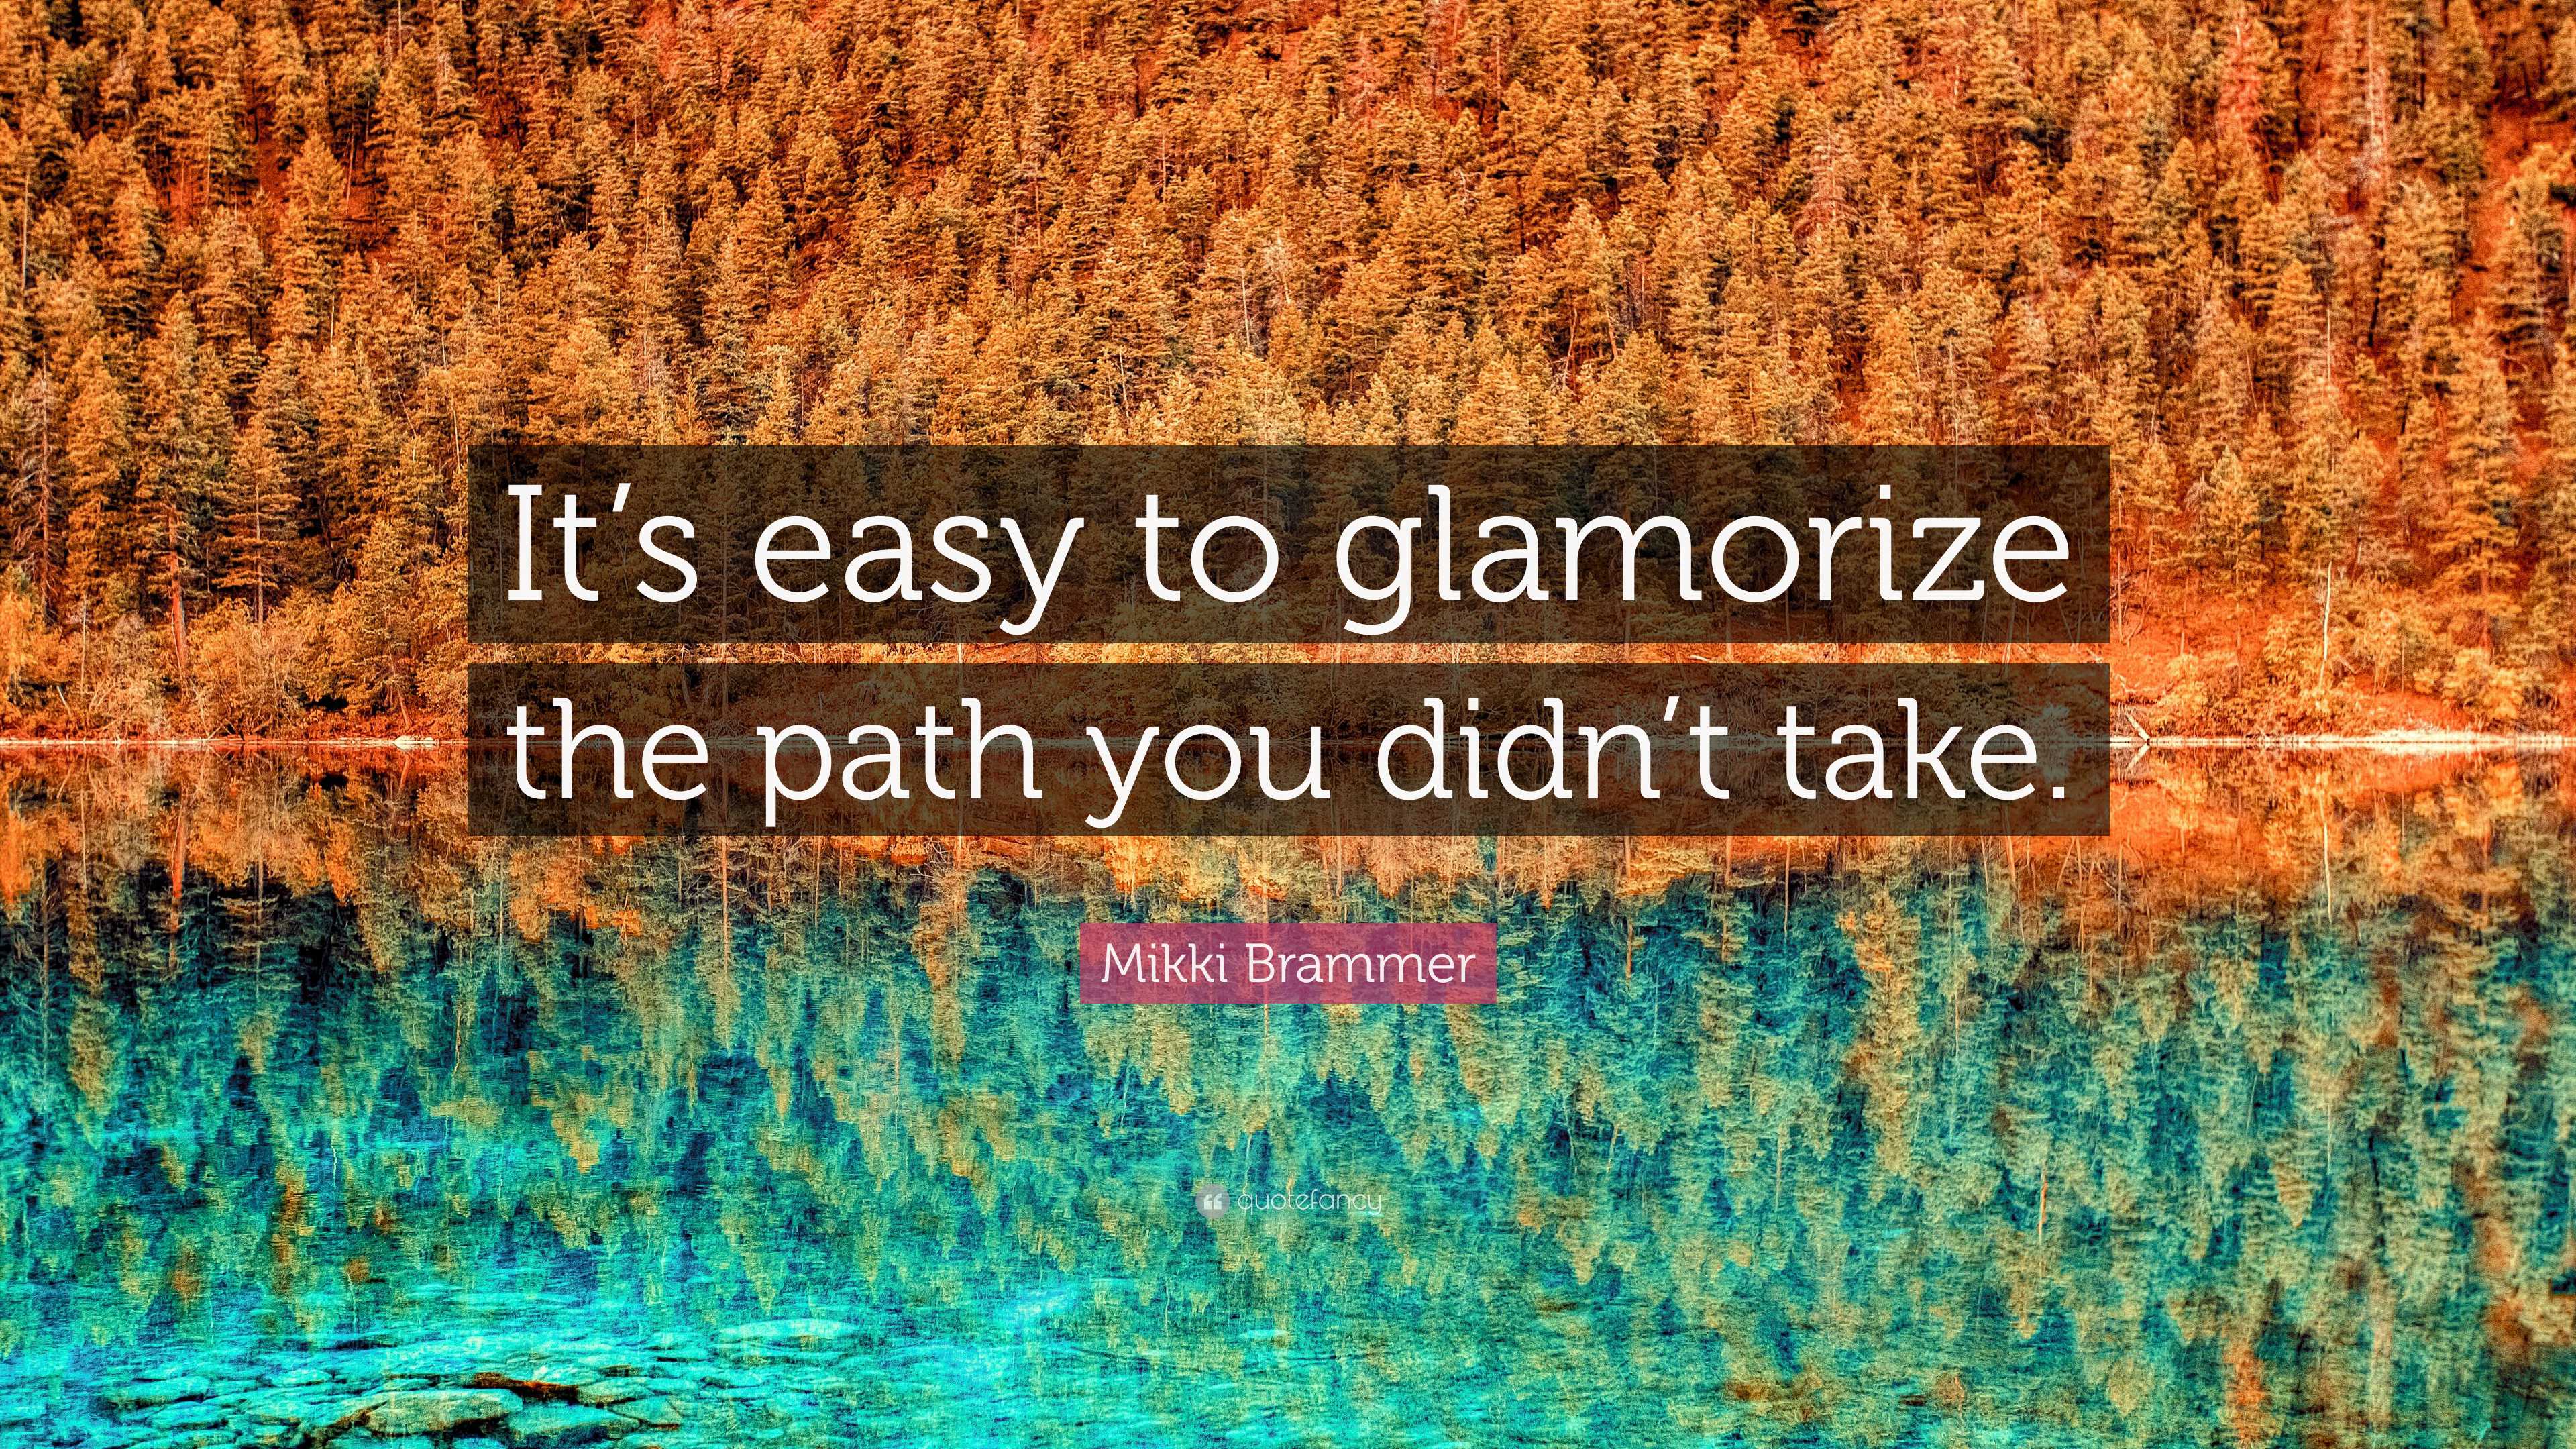 Mikki Brammer Quote: “It's easy to glamorize the path you didn't